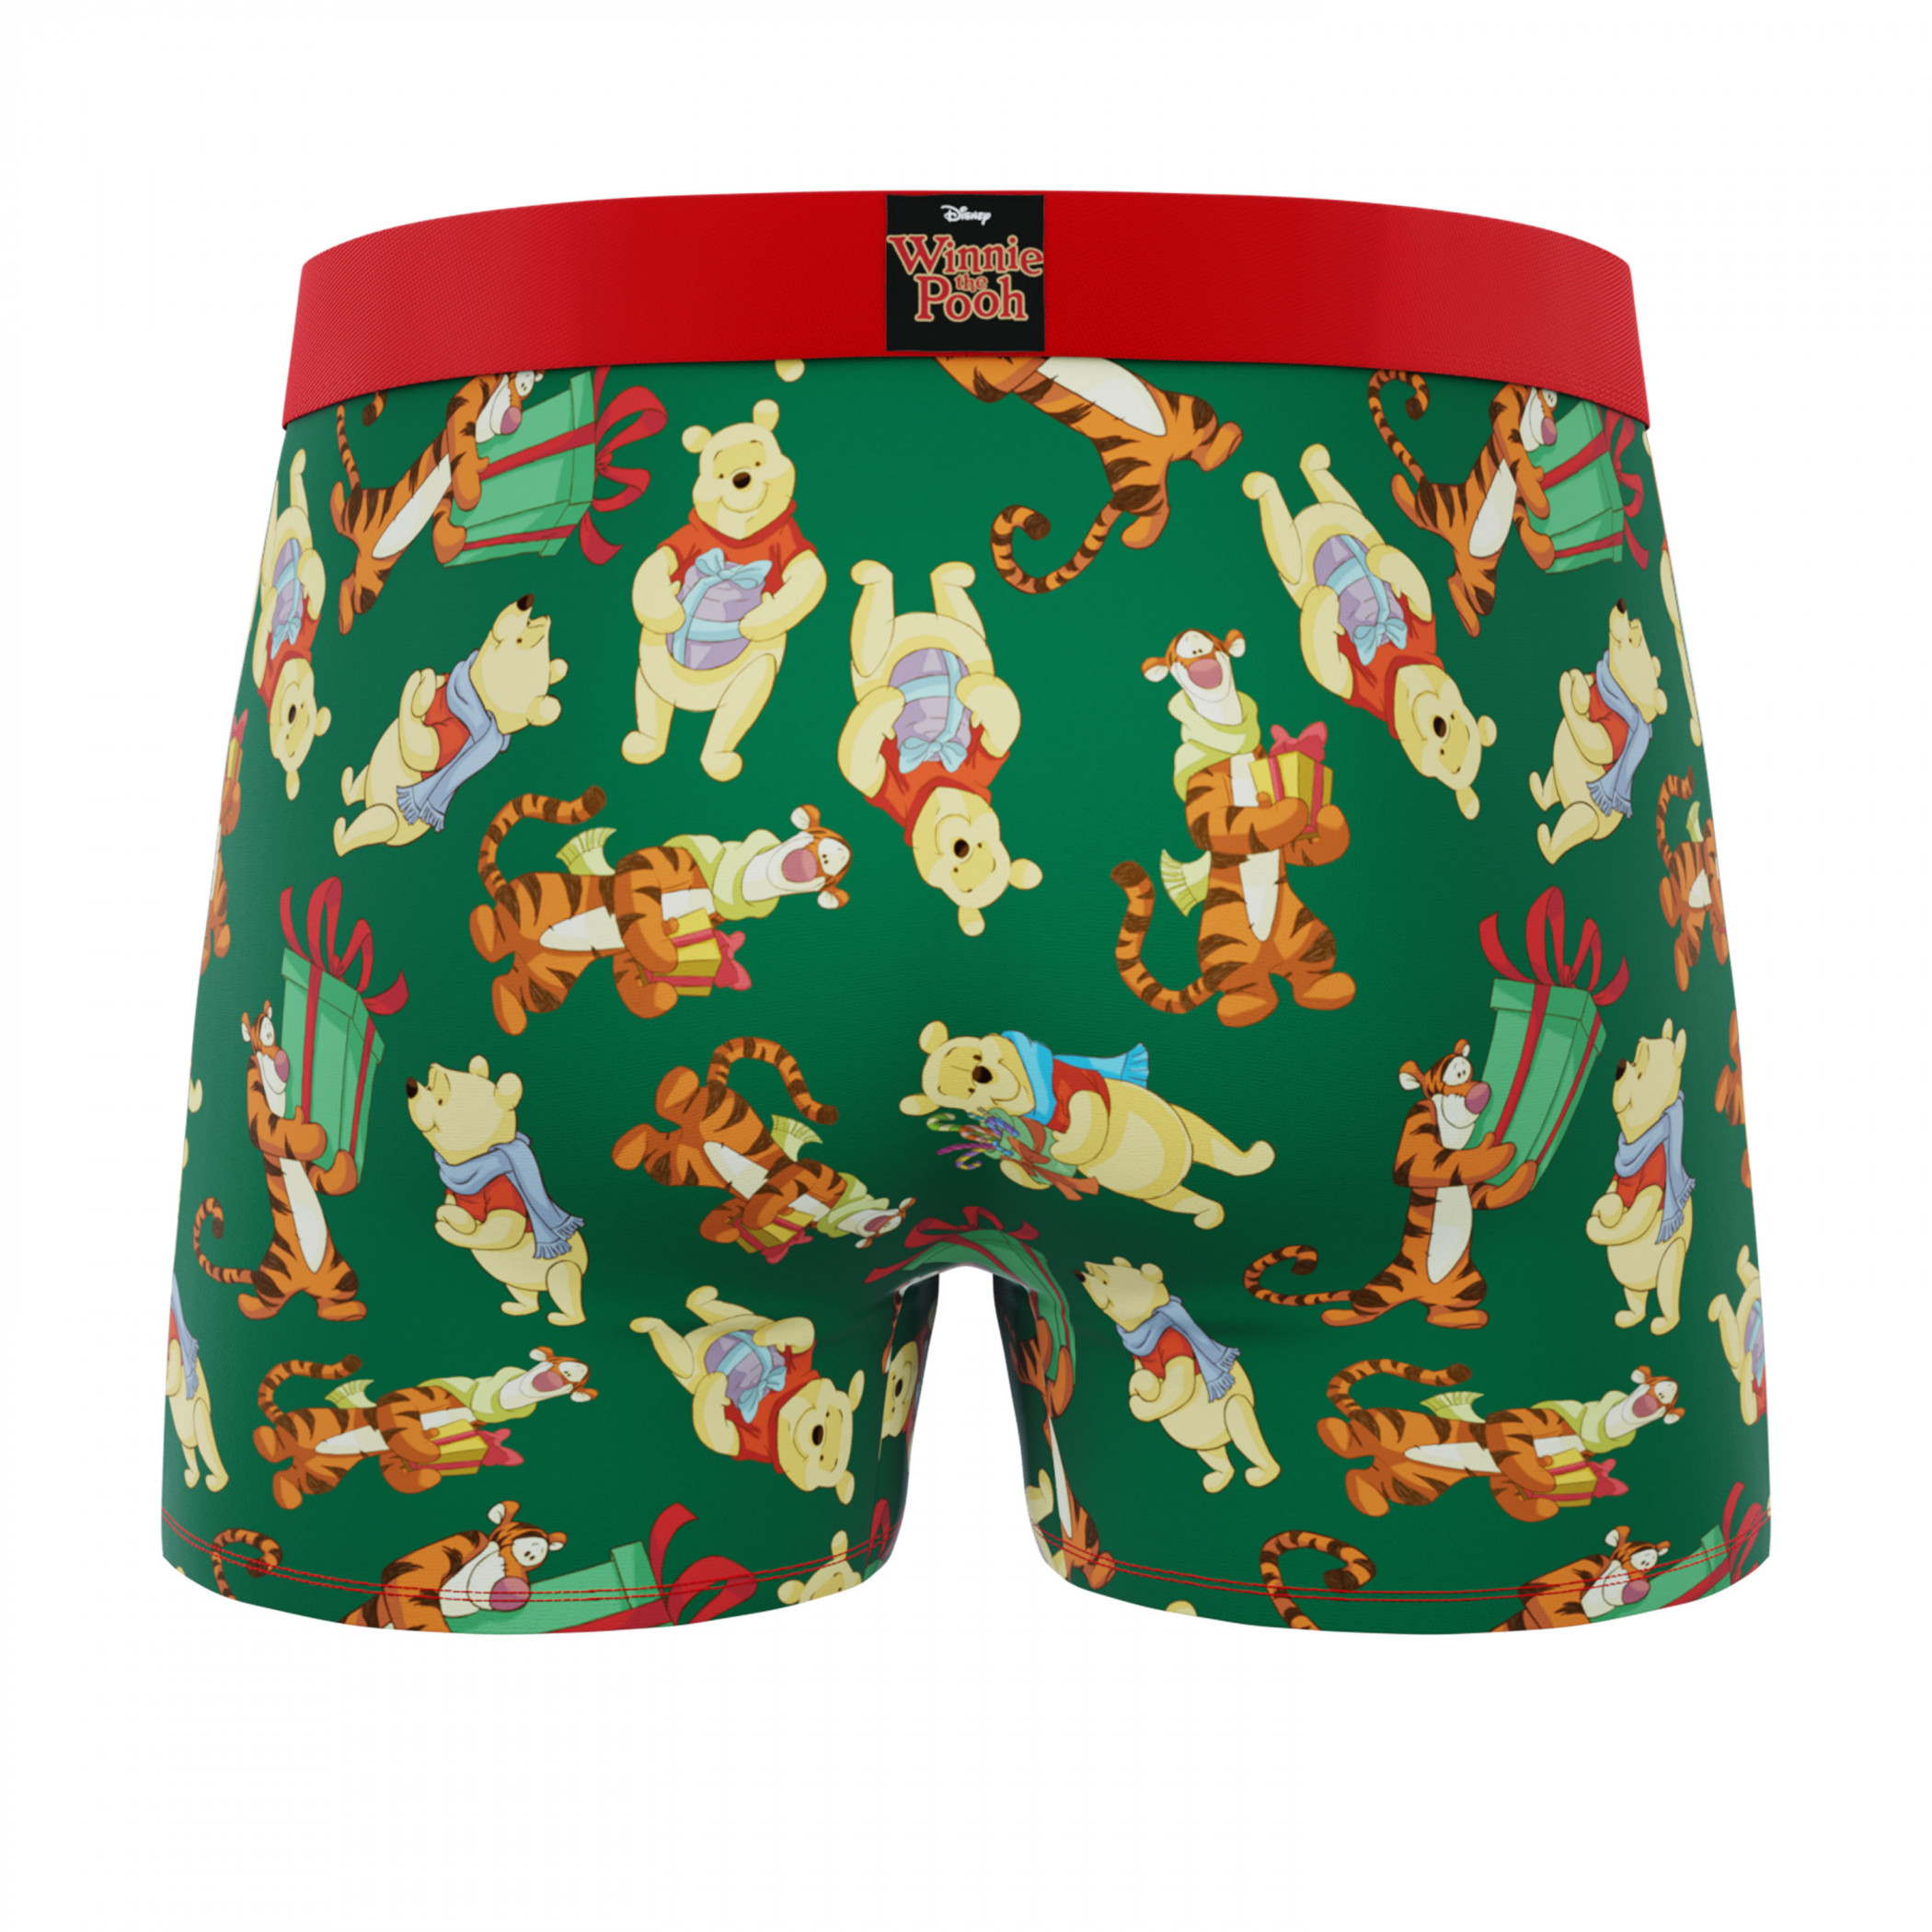 Crazy Boxers Winnie The Pooh Gift Giving Boxer Briefs